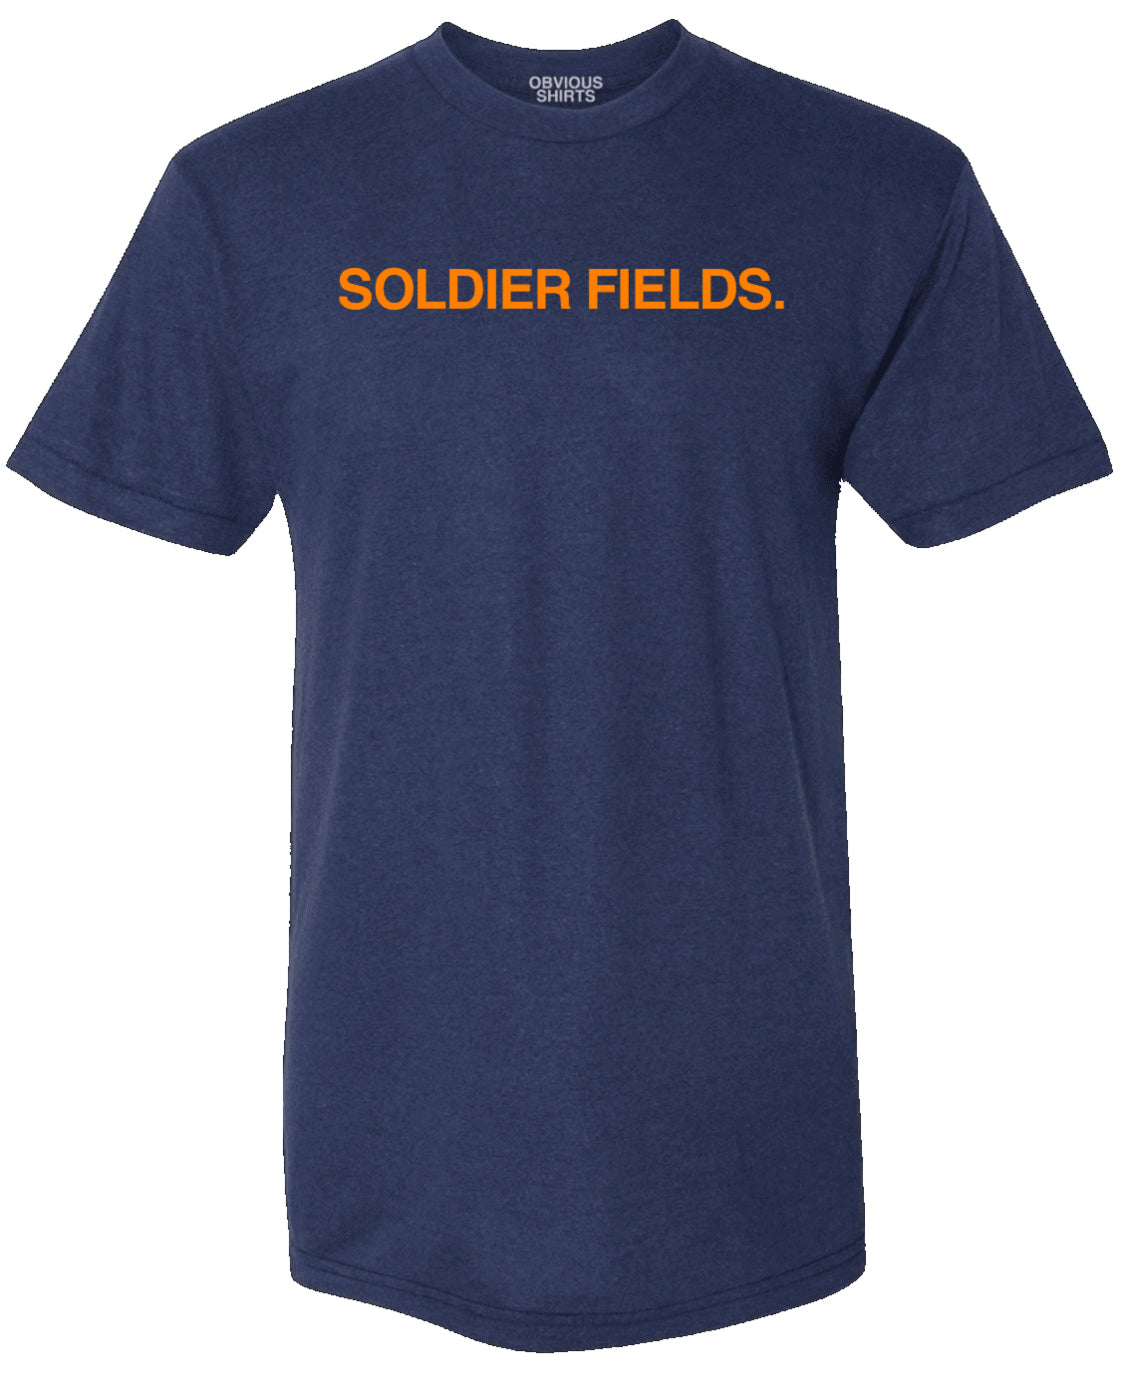 Soldier Fields. Tee by Obvious Shirts